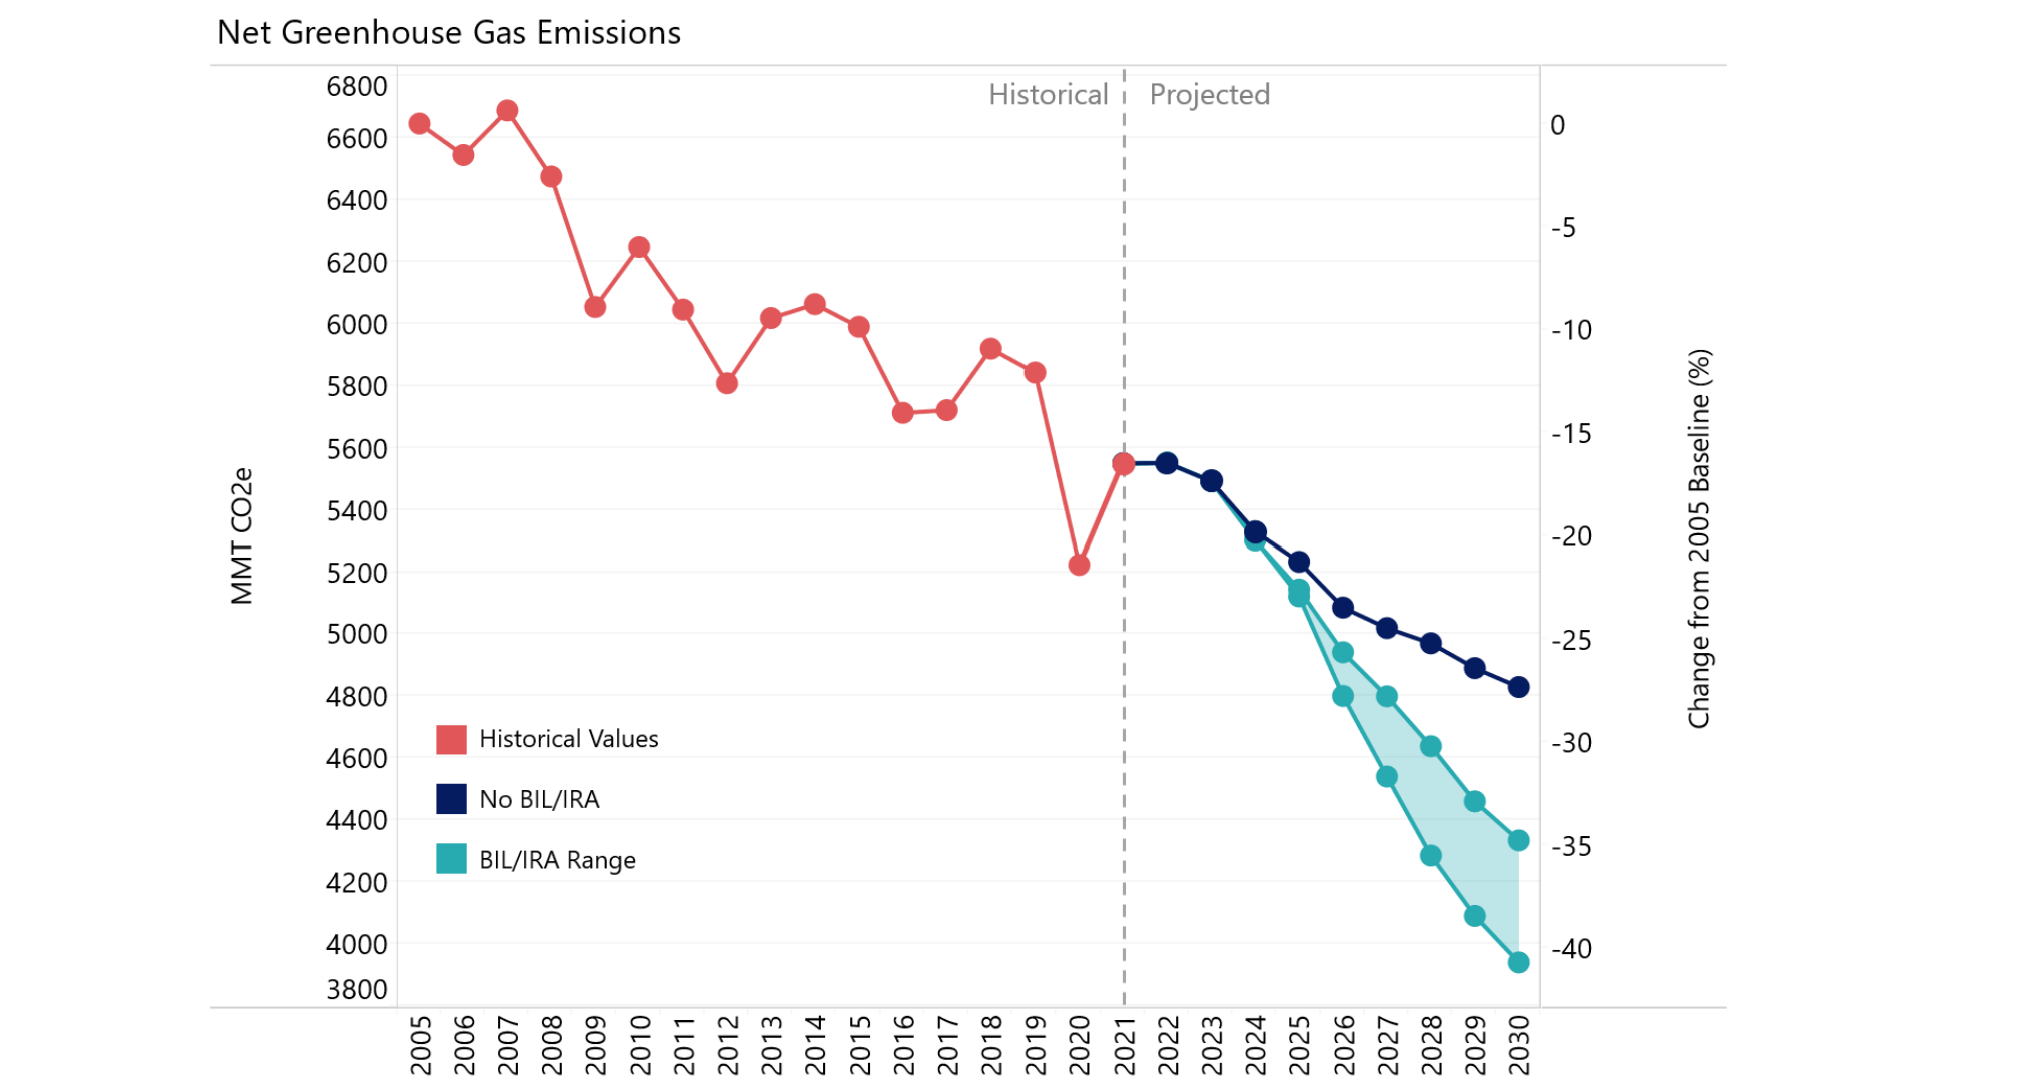 Graph comparing projected U.S. net greenhouse gas emissions under an IRA/IIJA investment scenario and no IRA/IIJA investment scenario. Source: Investing in American Energy report by the U.S. Department of Energy.